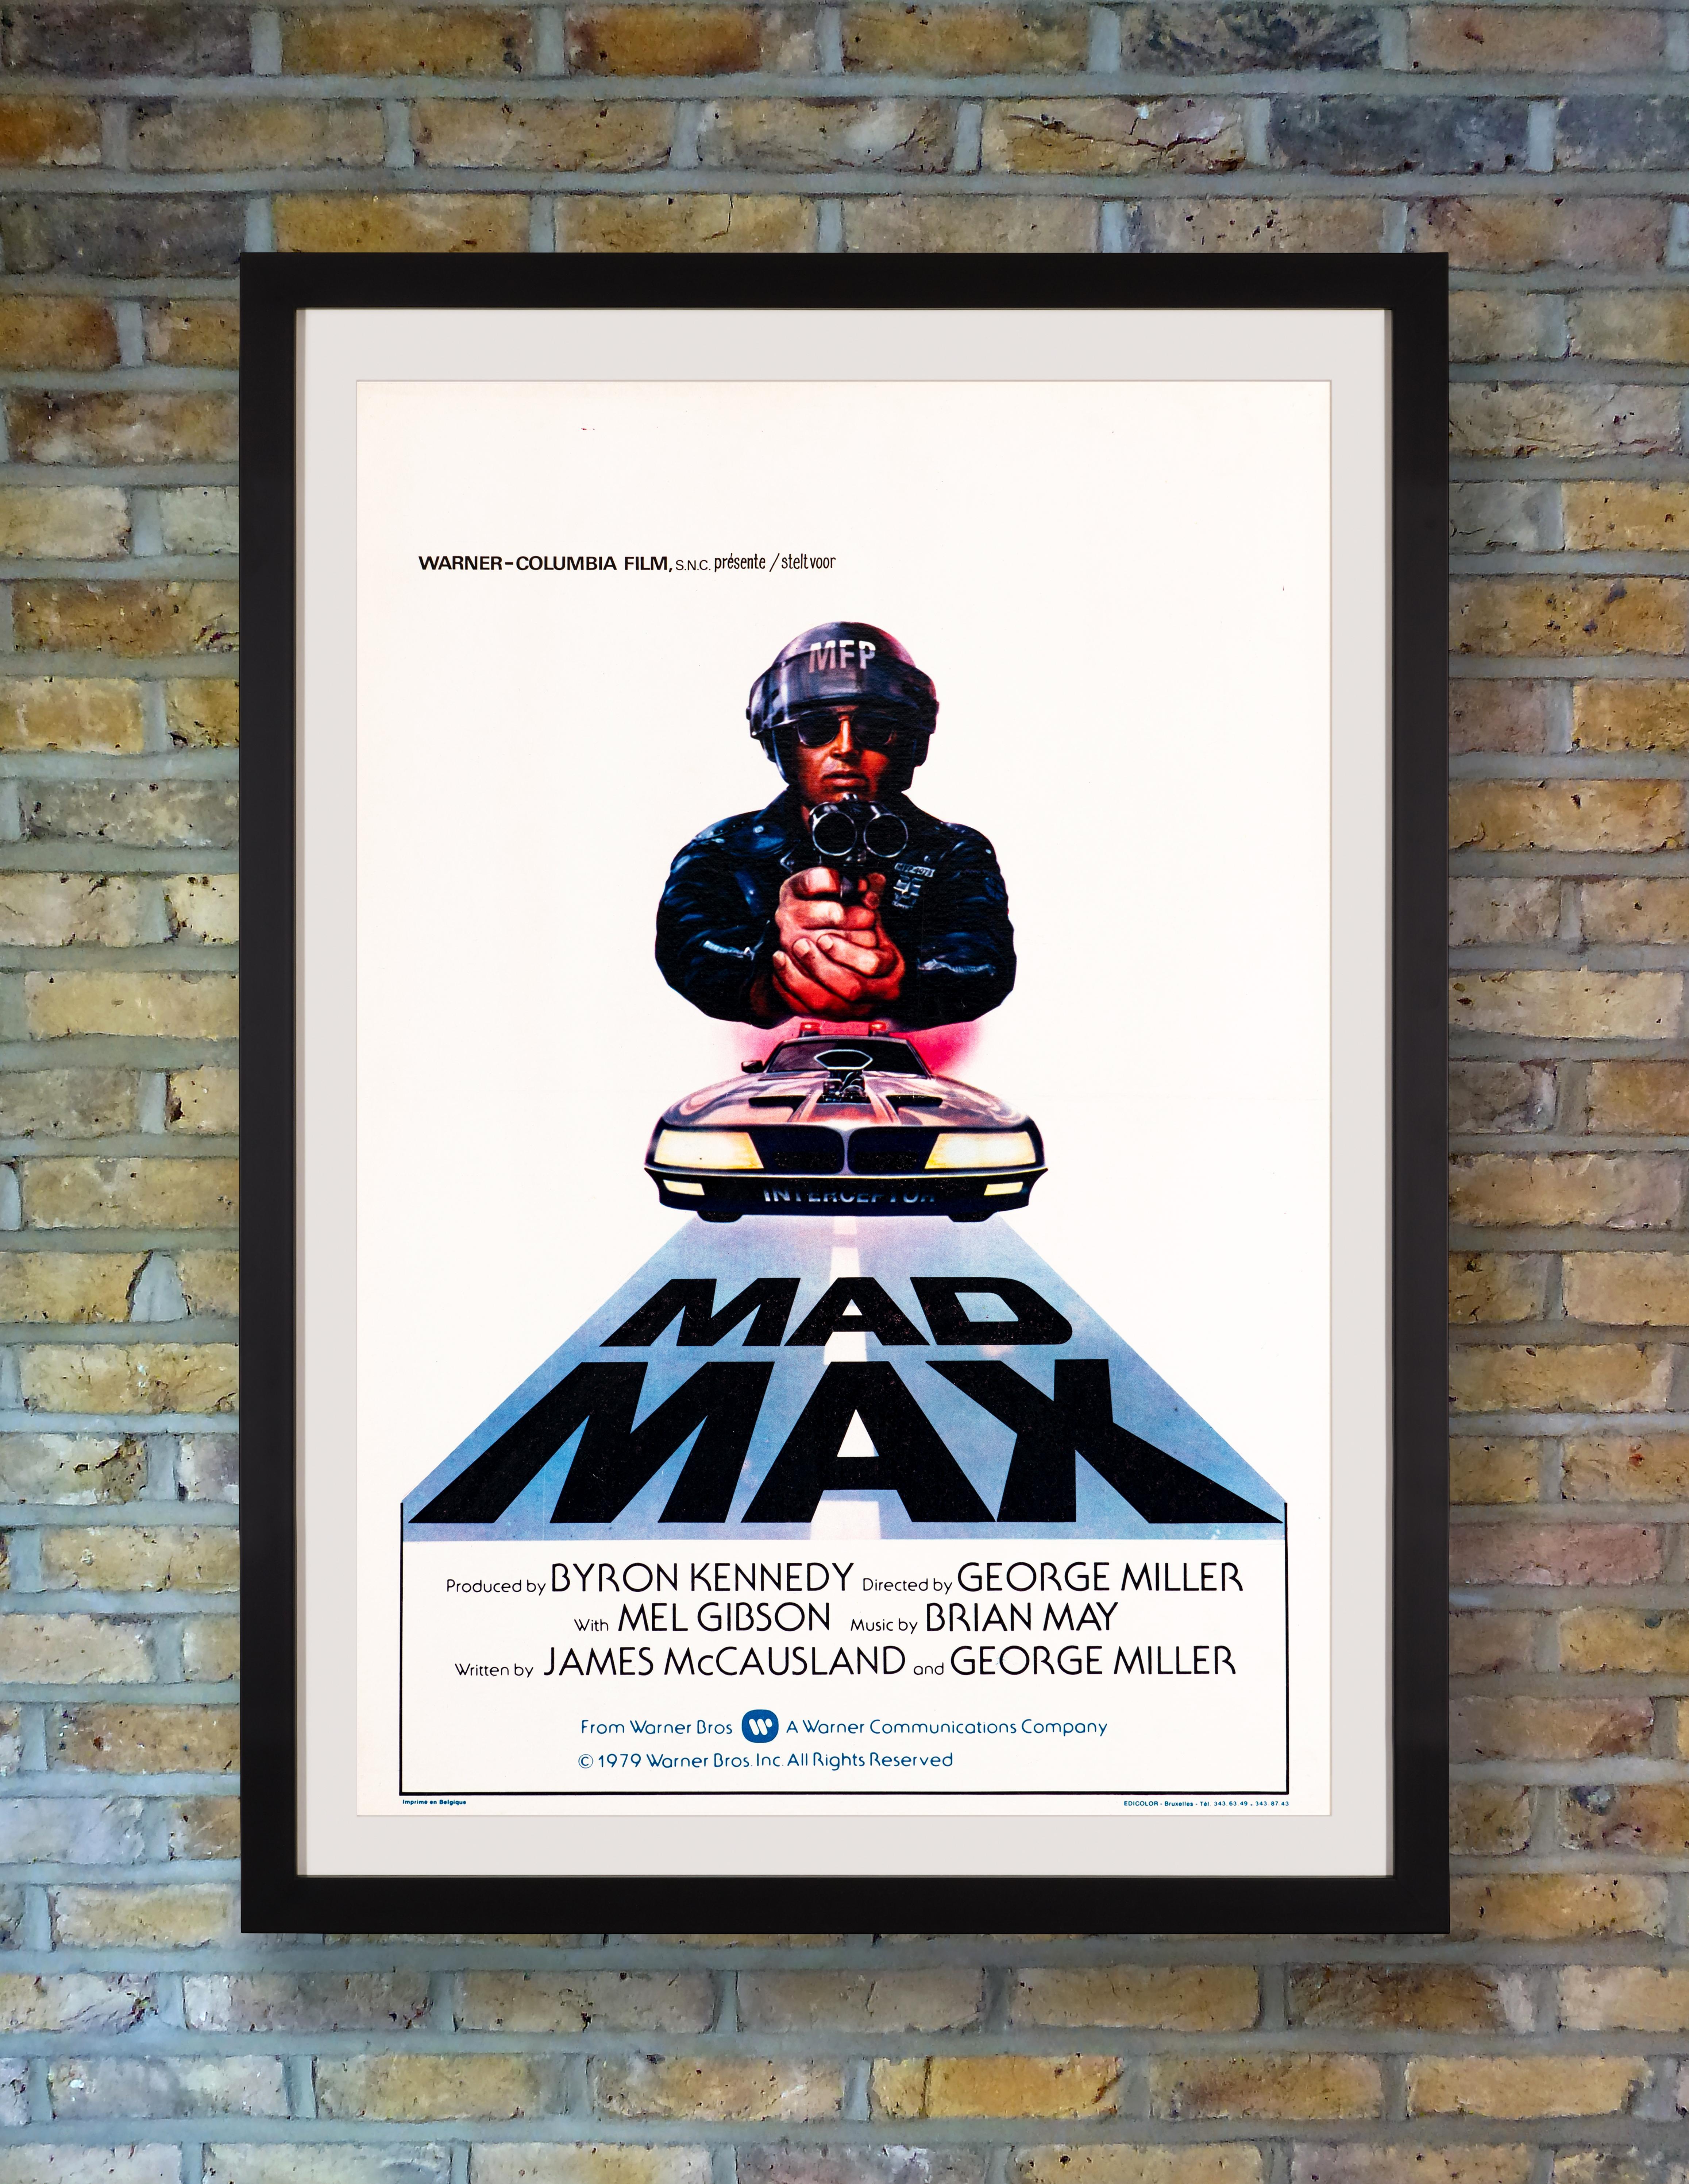 Making a bold visual statement with a clean and straightforward design, this small-format poster for the first Belgian release of George Miller's groundbreaking 1979 pre-apocalyptic action thriller 'Mad Max' utilises the same superb Tom Beauvais